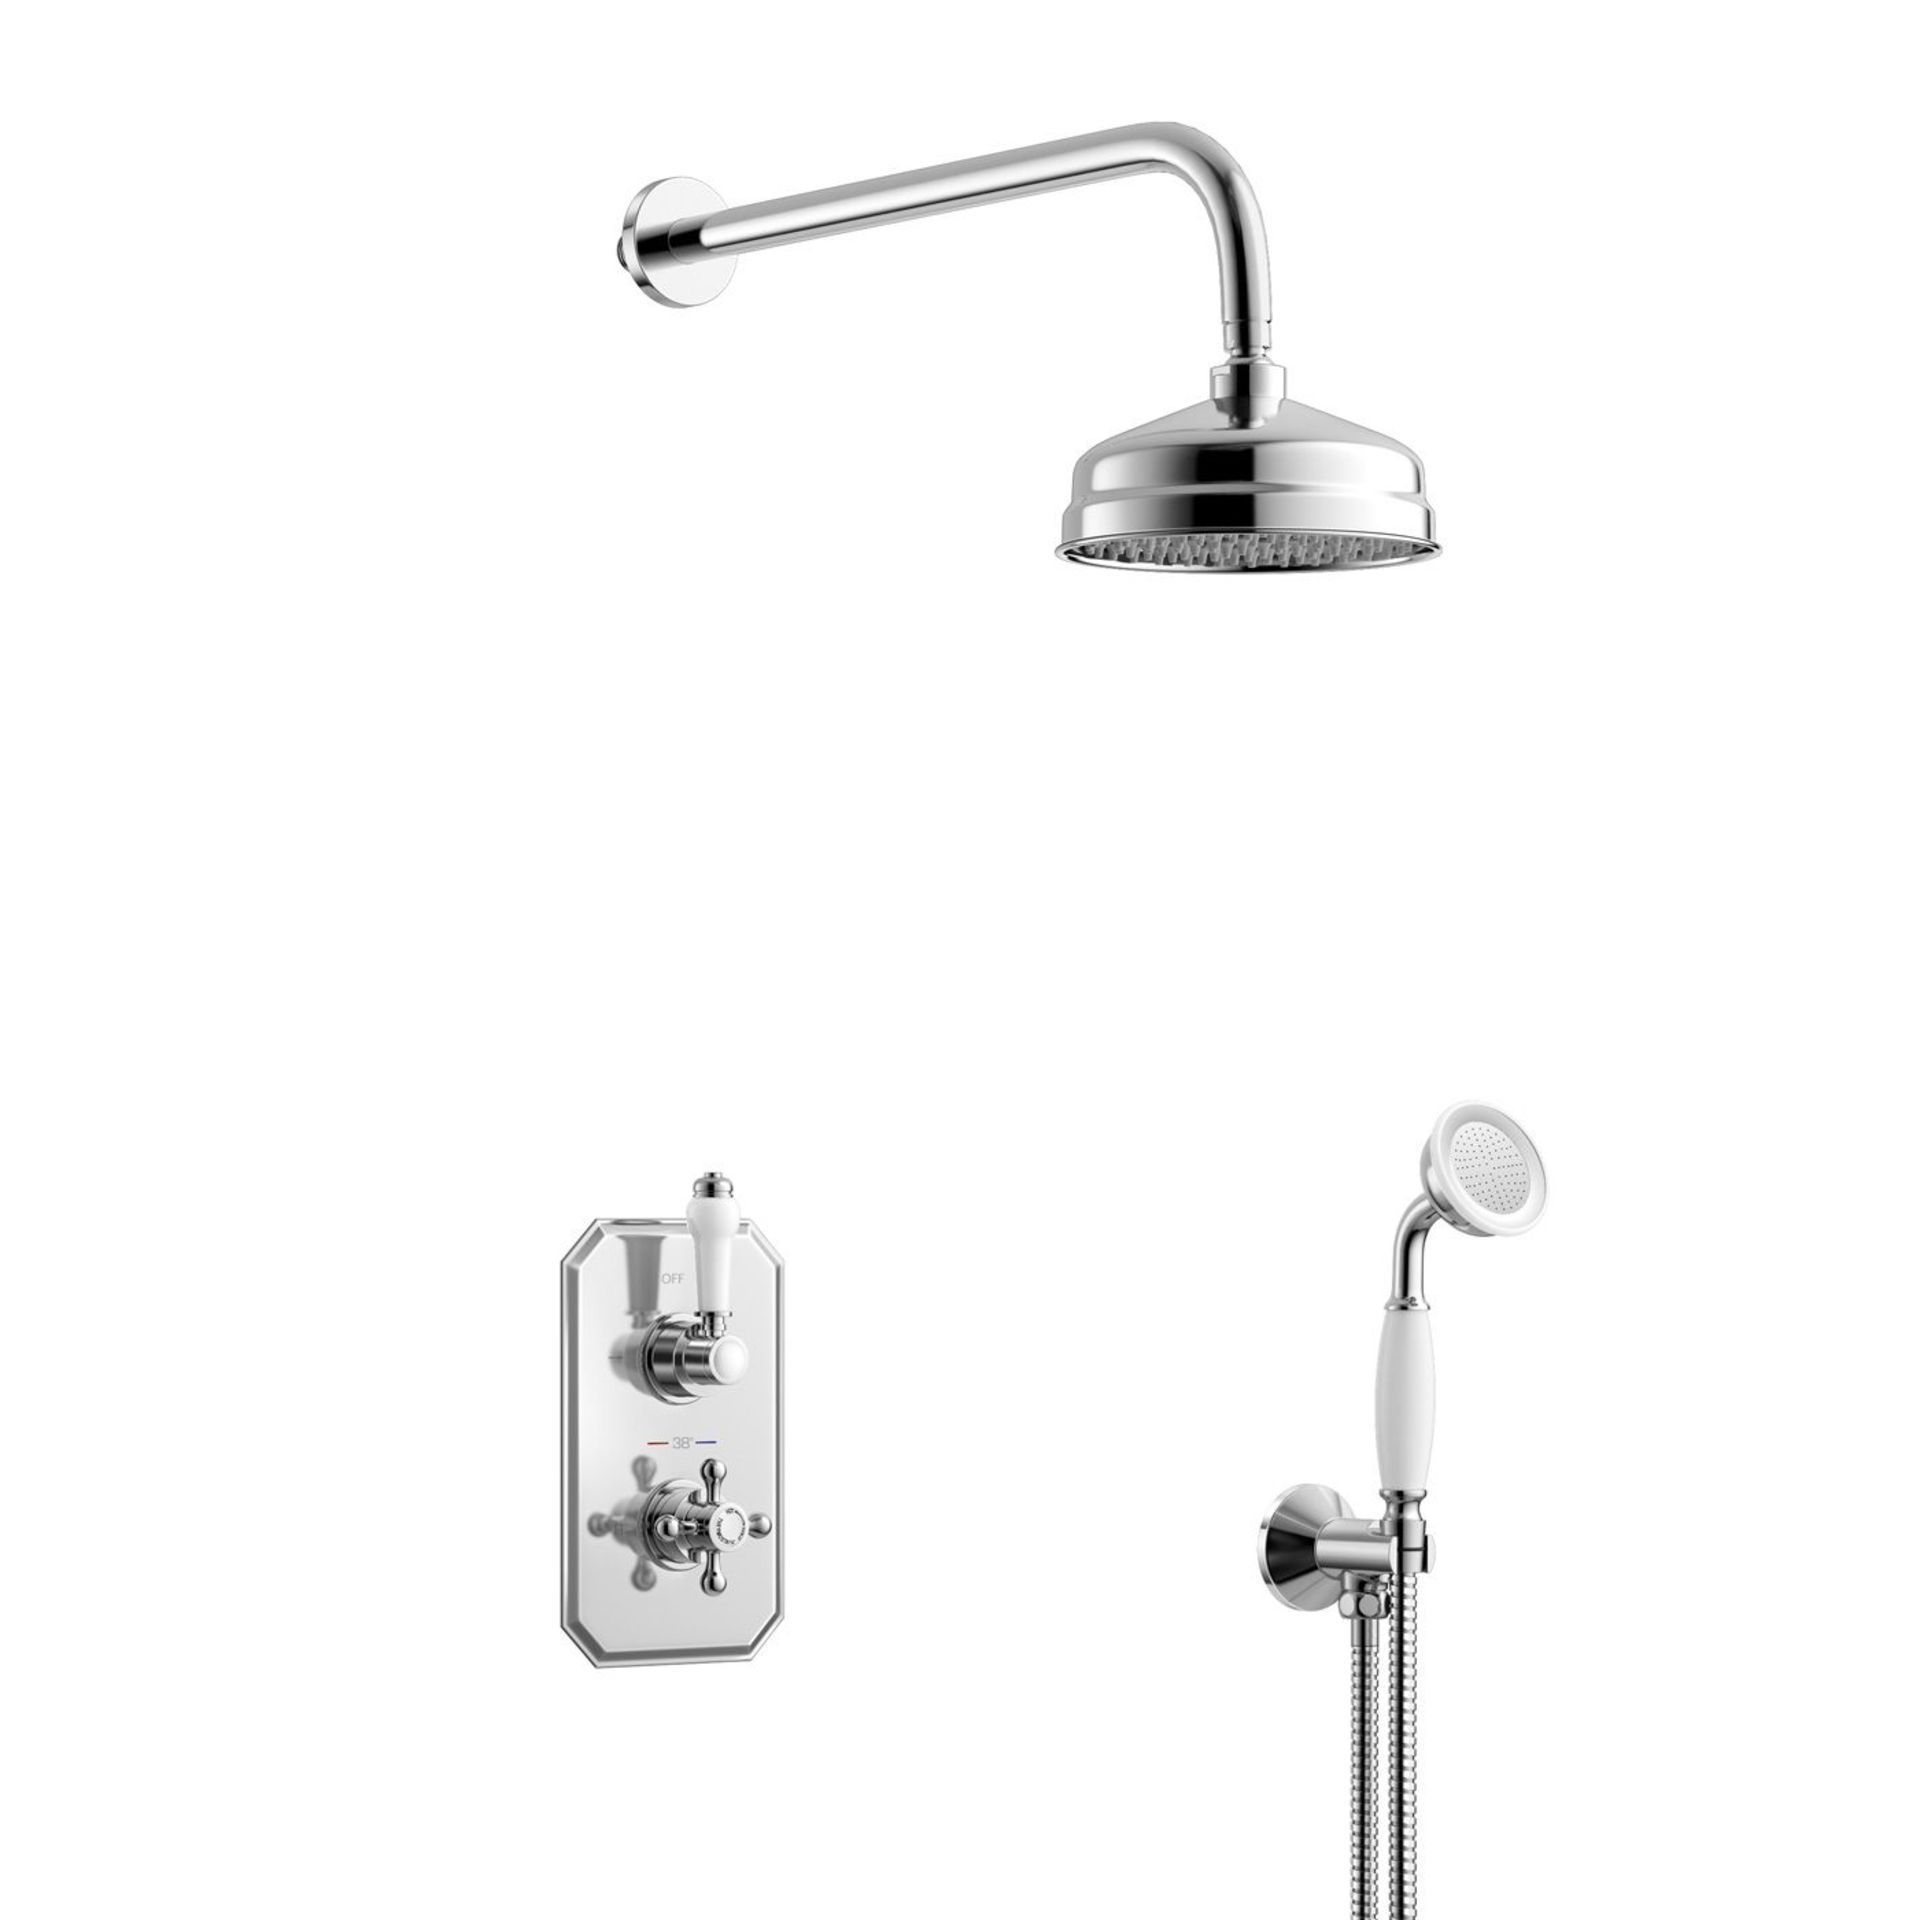 New & Boxed 150mm Traditional Stainless Steel Wall Mounted Head, Rail Kit. RRP £511.99.Ss2Wct... - Image 2 of 3